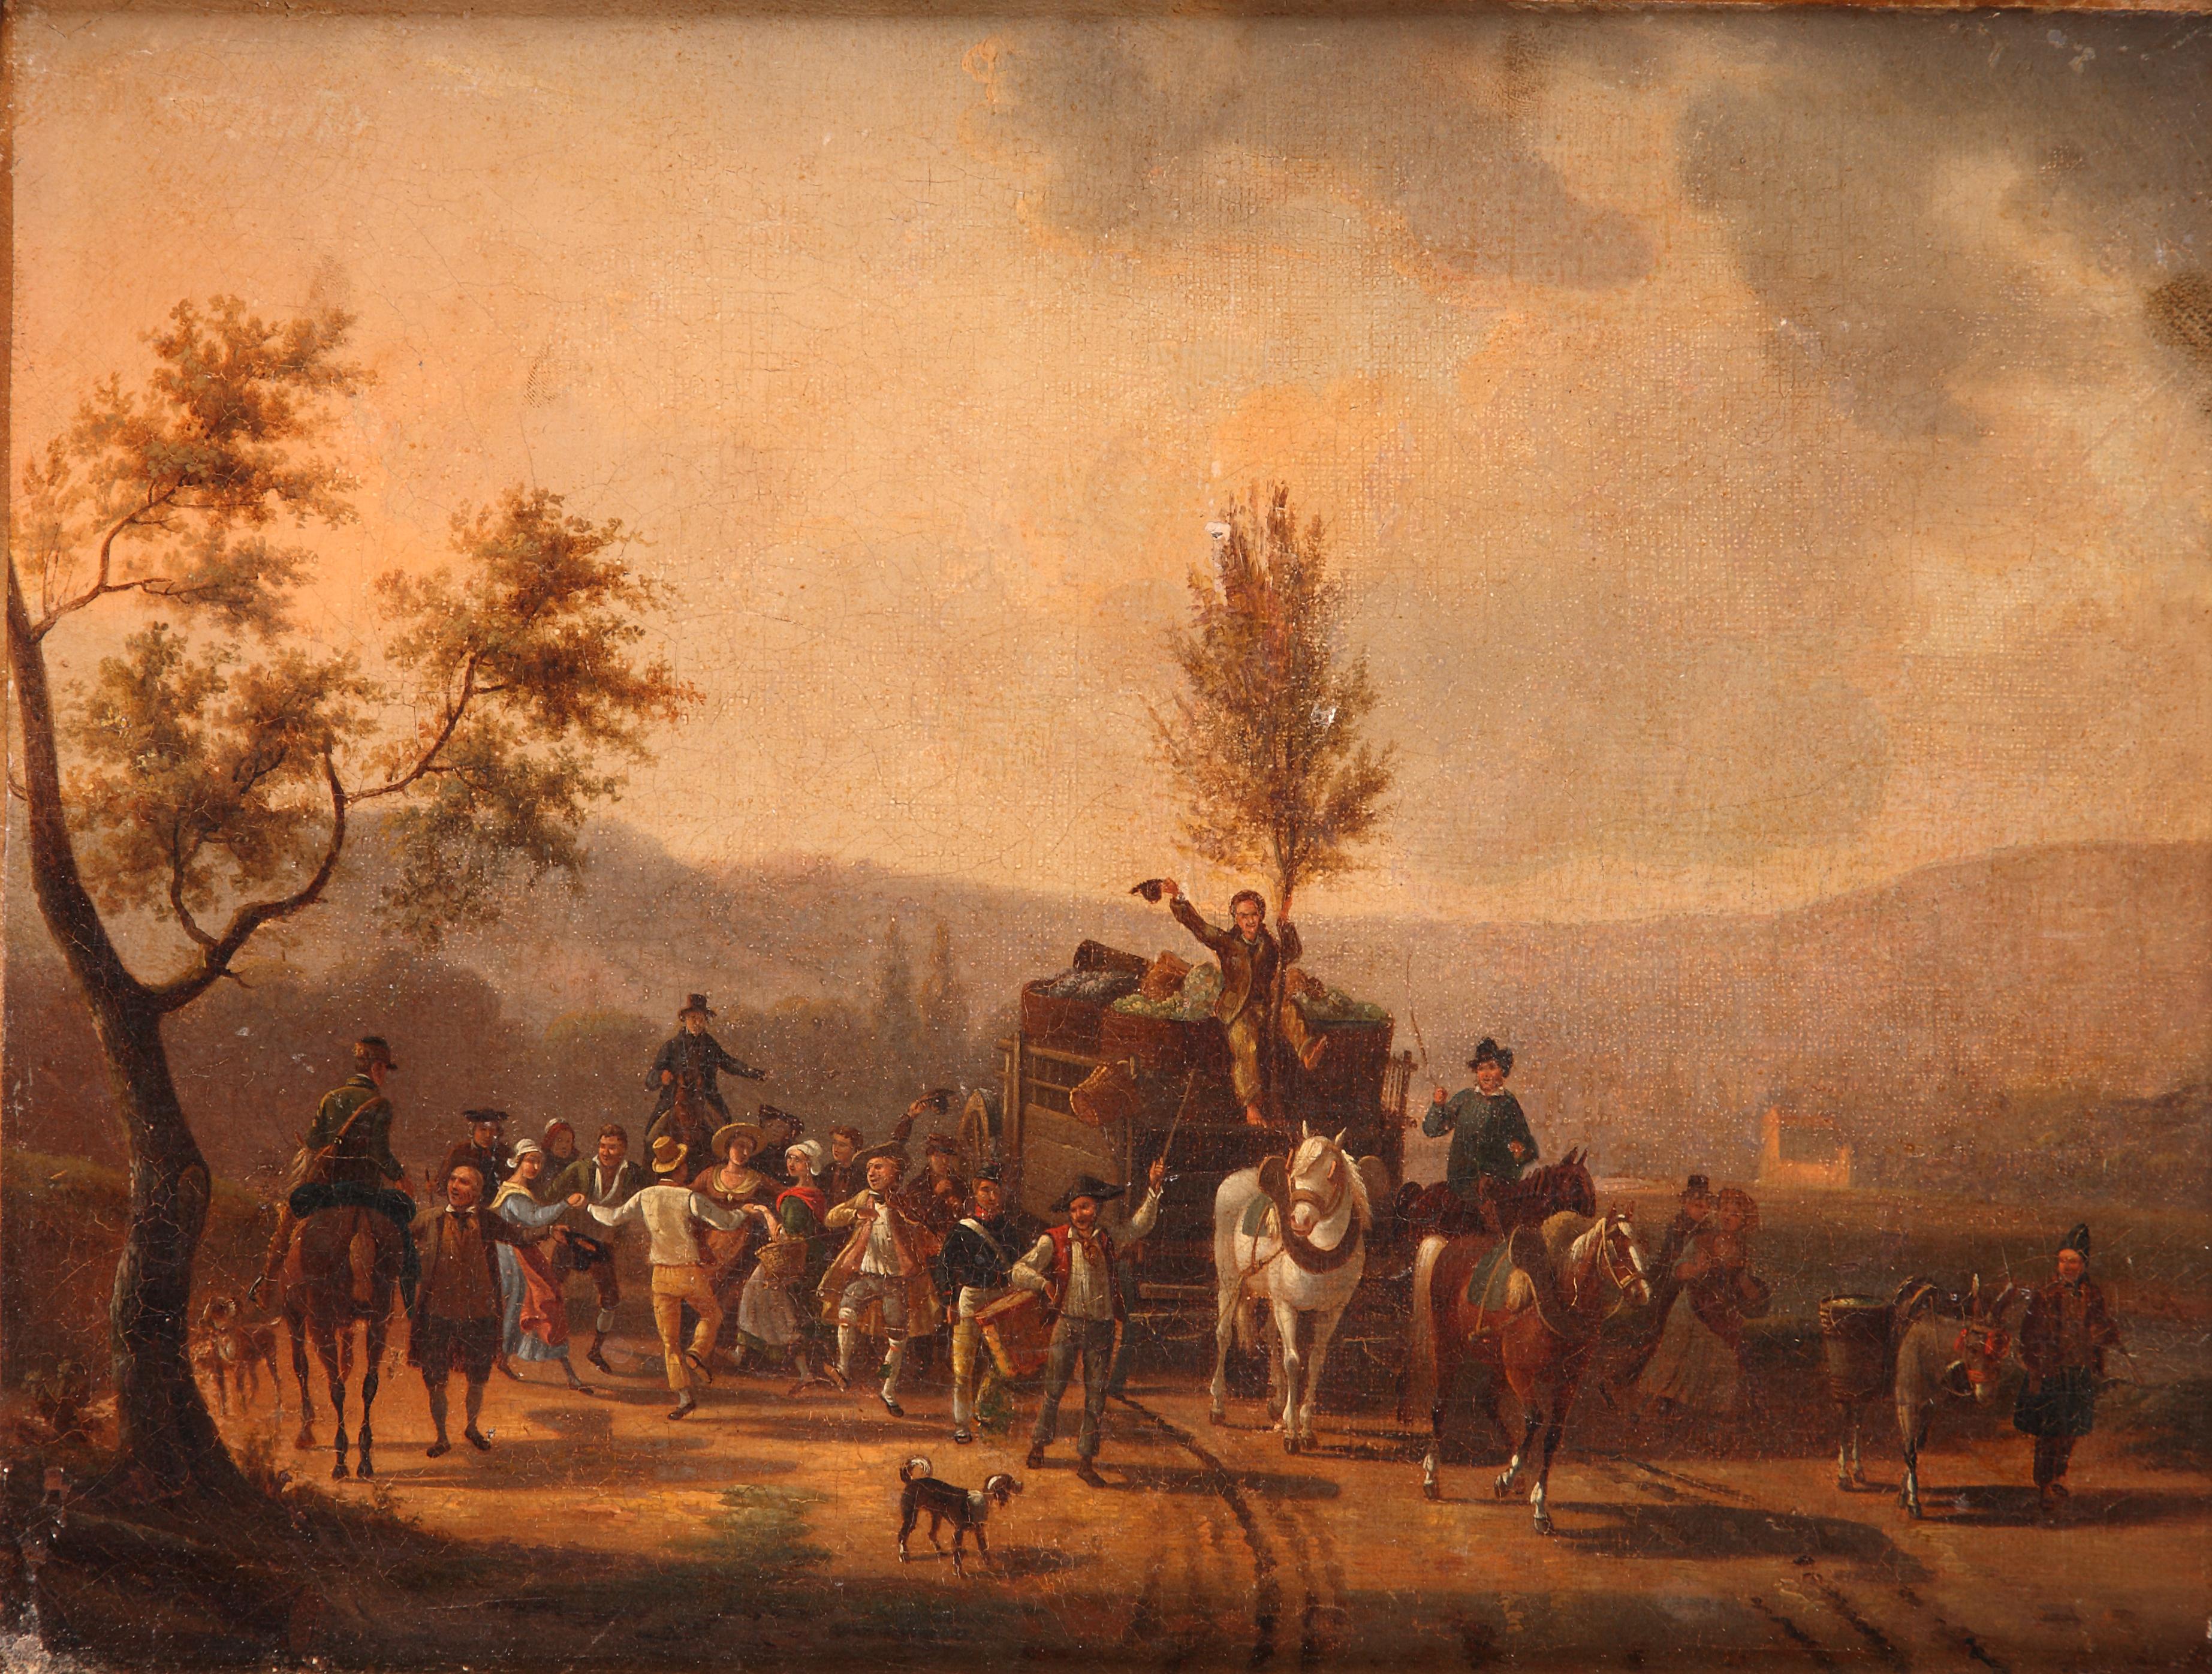 Scene from everyday life representing a crowd returning from the fair, attributed to J.F. Demay.

Born in 1798 in Mire court (Meurthe-et-Moselle Dept.), died in 1850 in Paris, Jean-Louis-Francois Demay was a painter specializing in genre scenes and